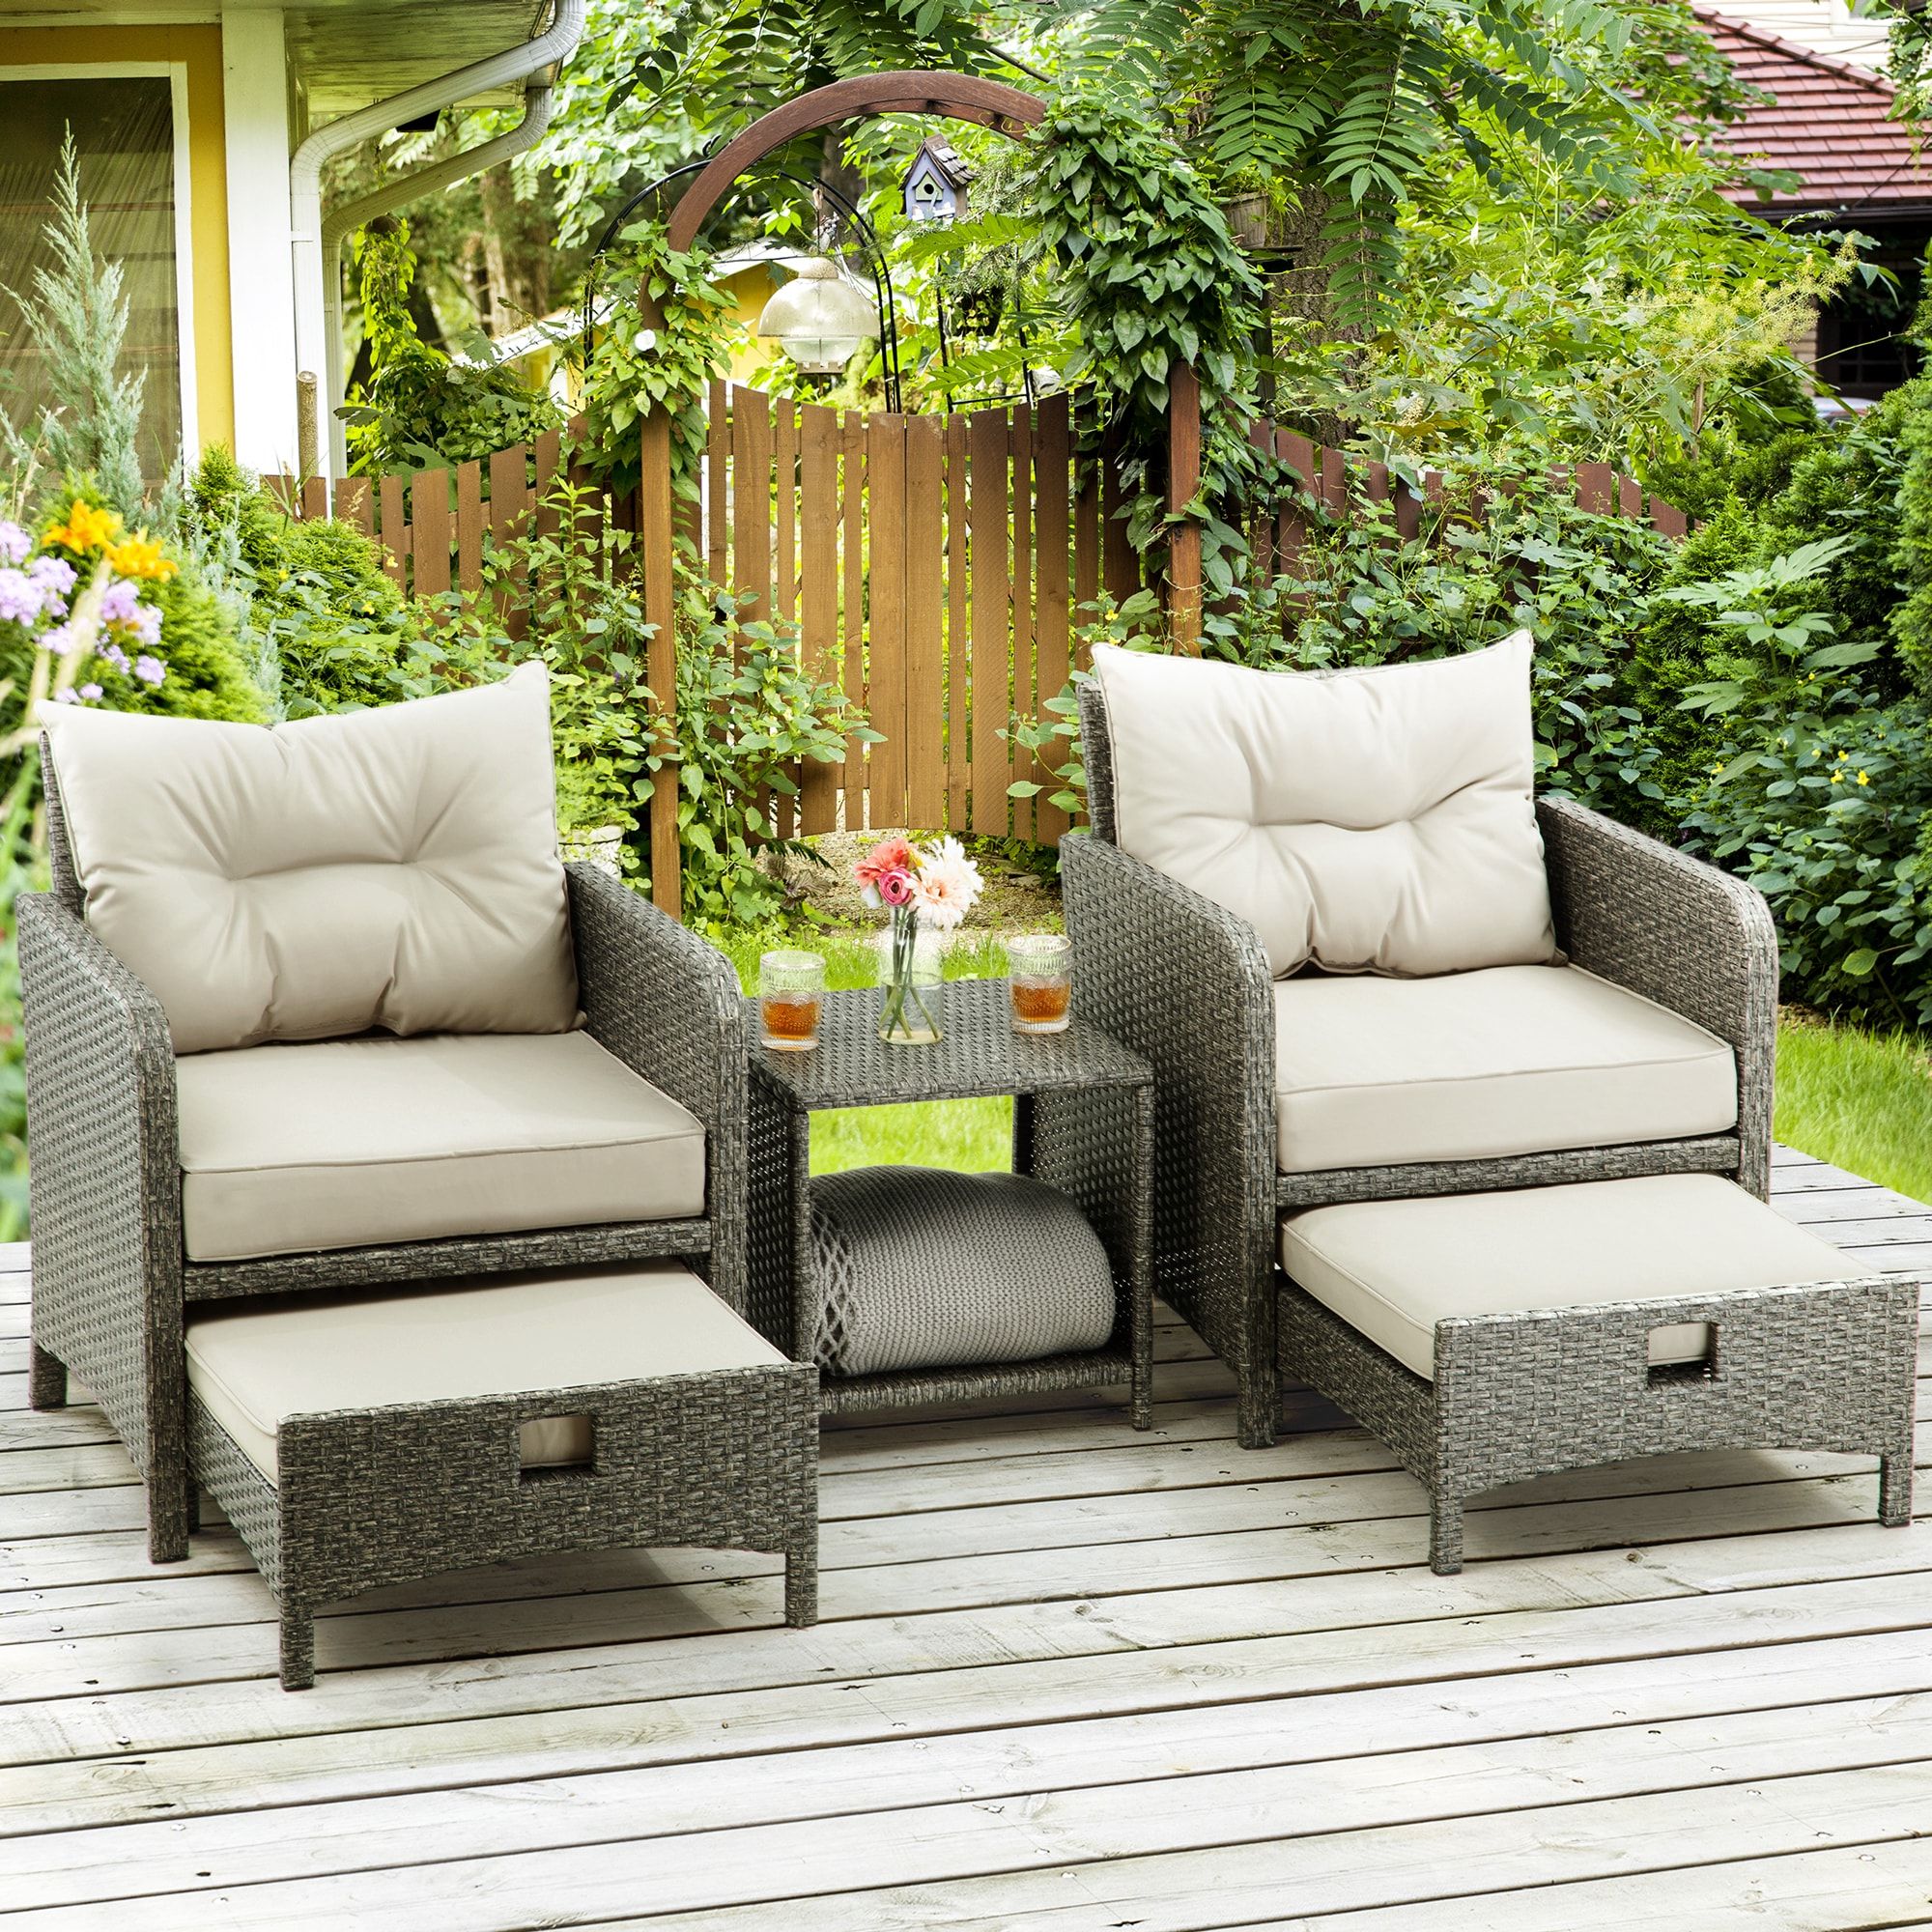 5 Piece Patio Furniture Set Regarding Current 5 Piece Patio Conversation Set 5 Piece Wicker Patio Conversation Set With  Gray Pamapic Cushions In The Patio Conversation Sets Department At Lowes (View 3 of 15)